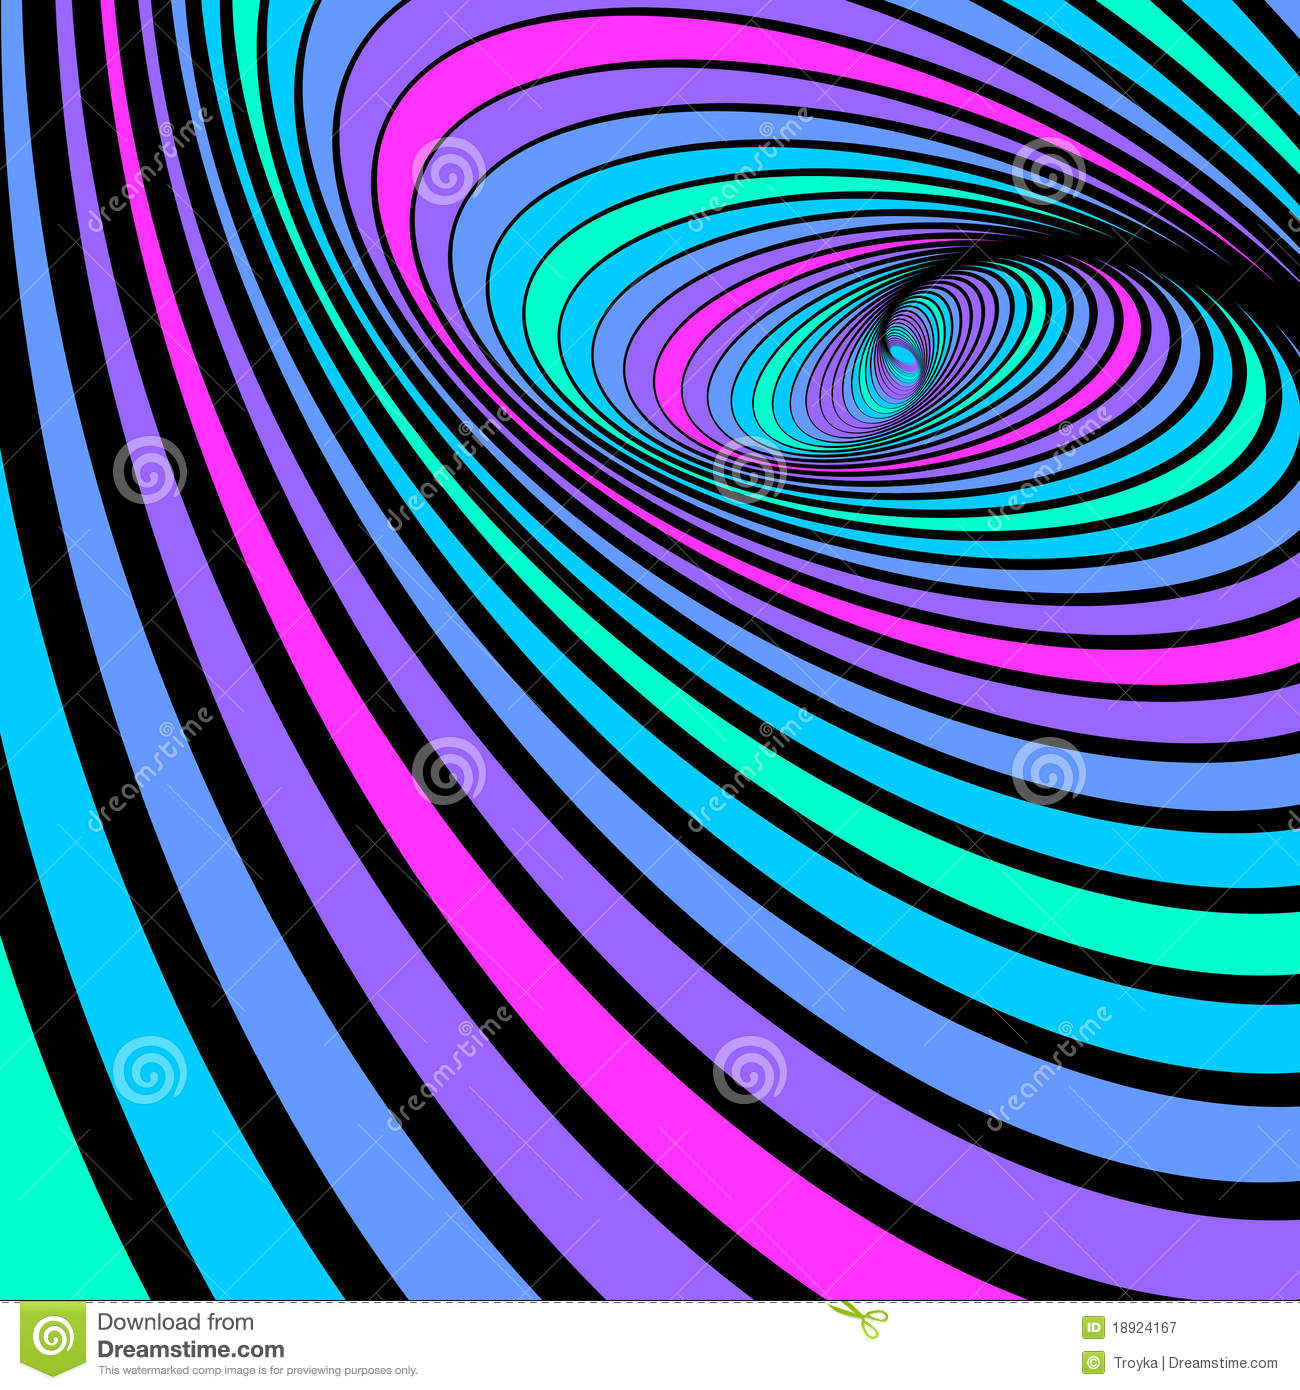 Whirl Spiral Movement  Abstract Background  Royalty Free Stock